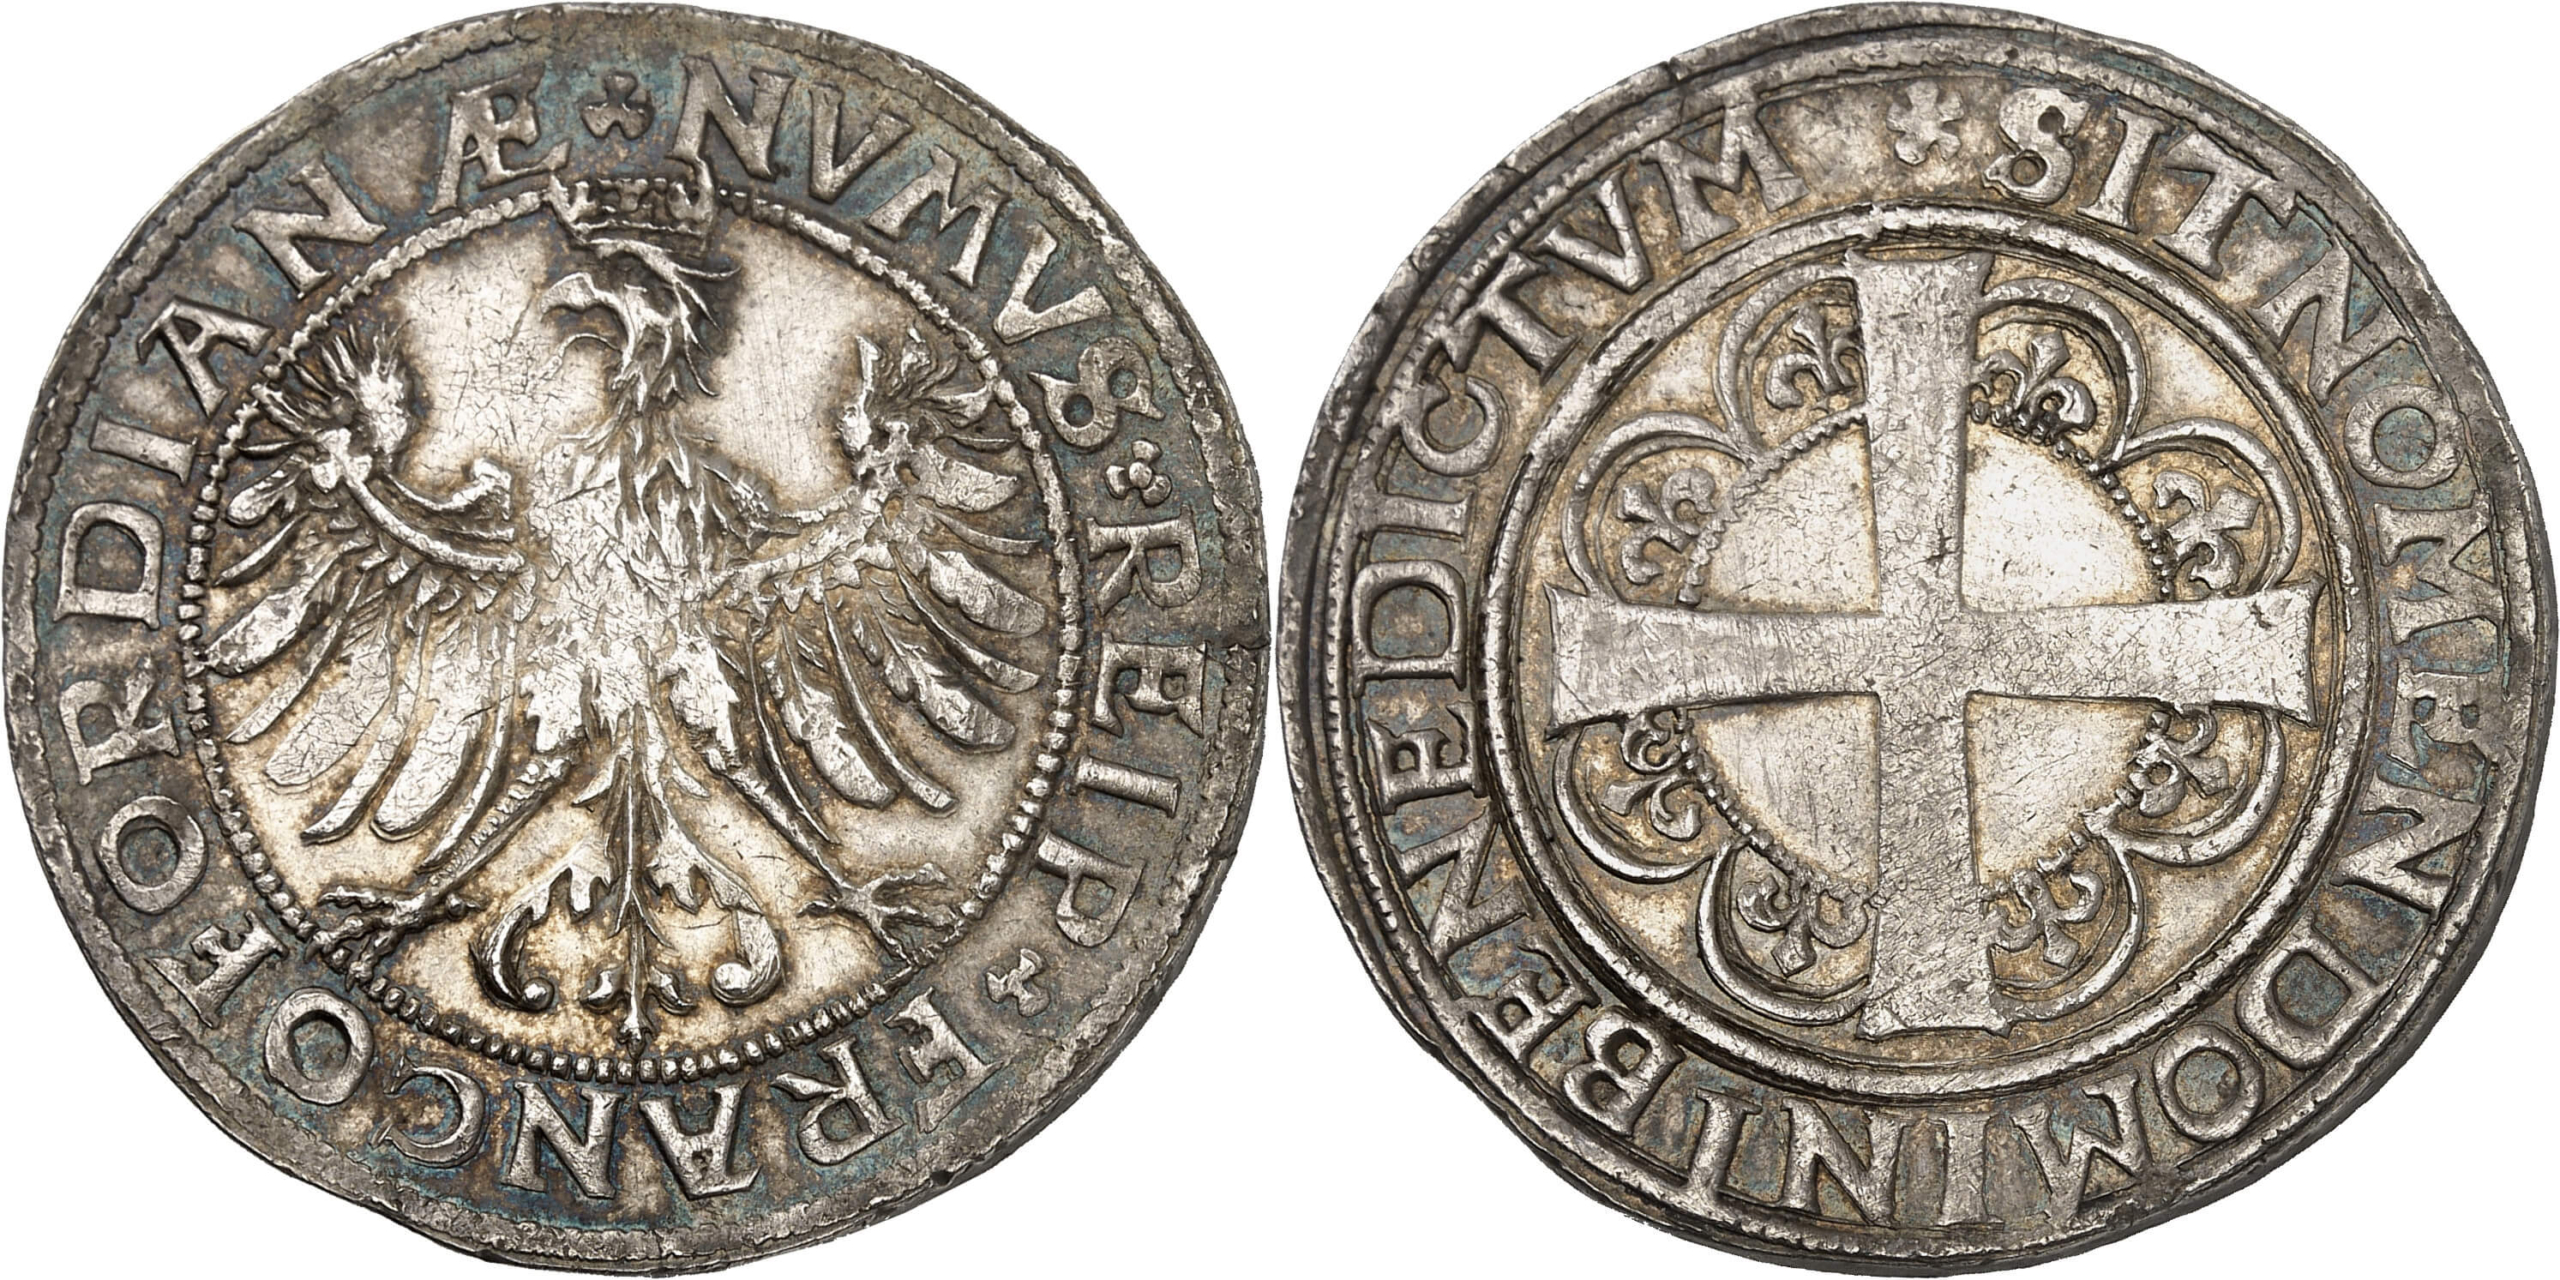 No. 2215. Frankfurt. Taler n.d. (1547). The oldest taler of the city of Frankfurt. Extremely rare. From the Vogel Collection, Hess auction 188 (1927), No. 2638. Very fine to extremely fine. Estimate: 20,000 euros. Hammer price: 40,000 euros.